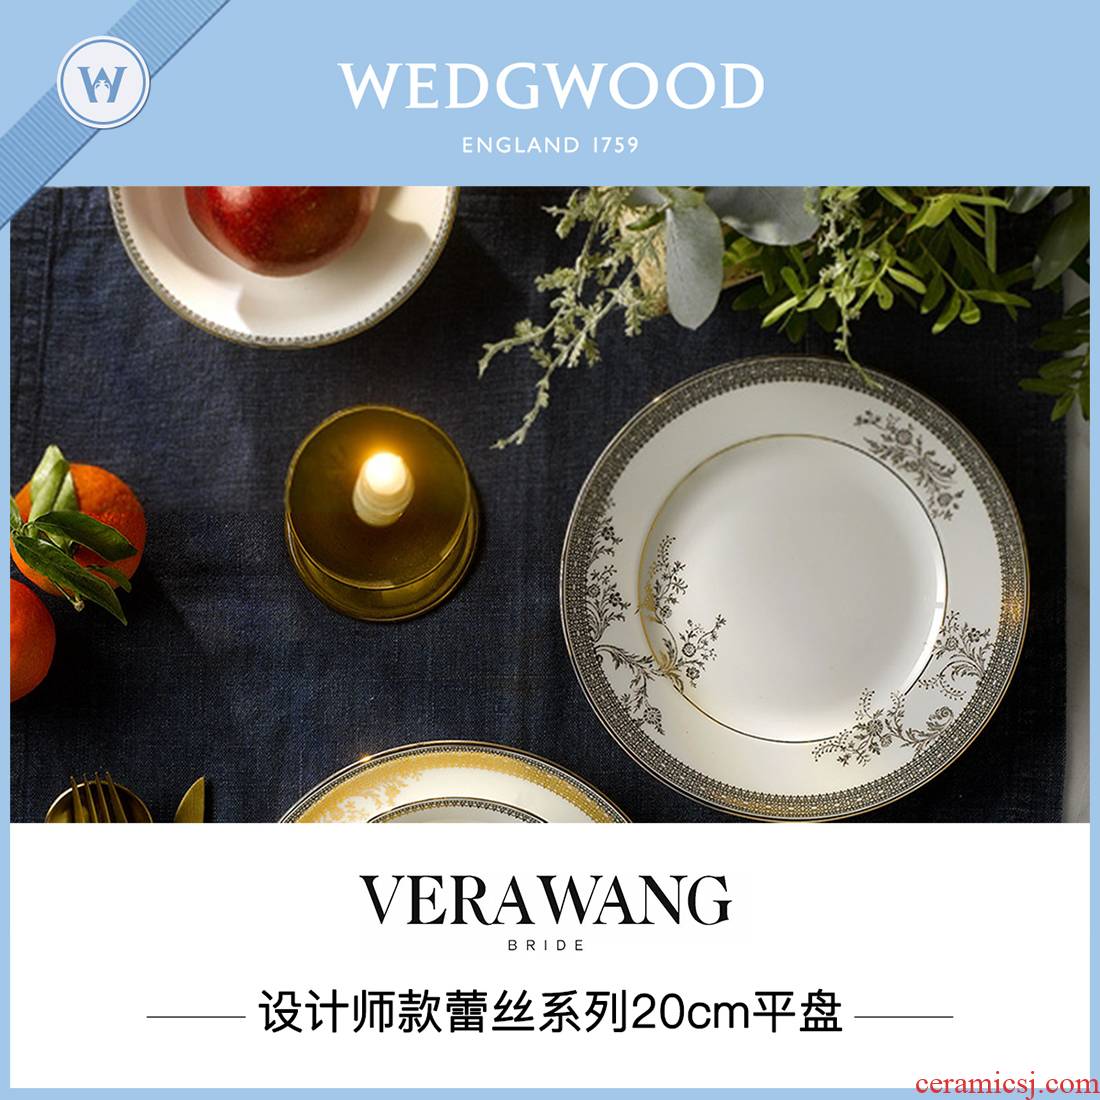 Wedgwood Very Wang vera Wang lace 20 cm ipads porcelain plates only snack plate of small fruit bowl